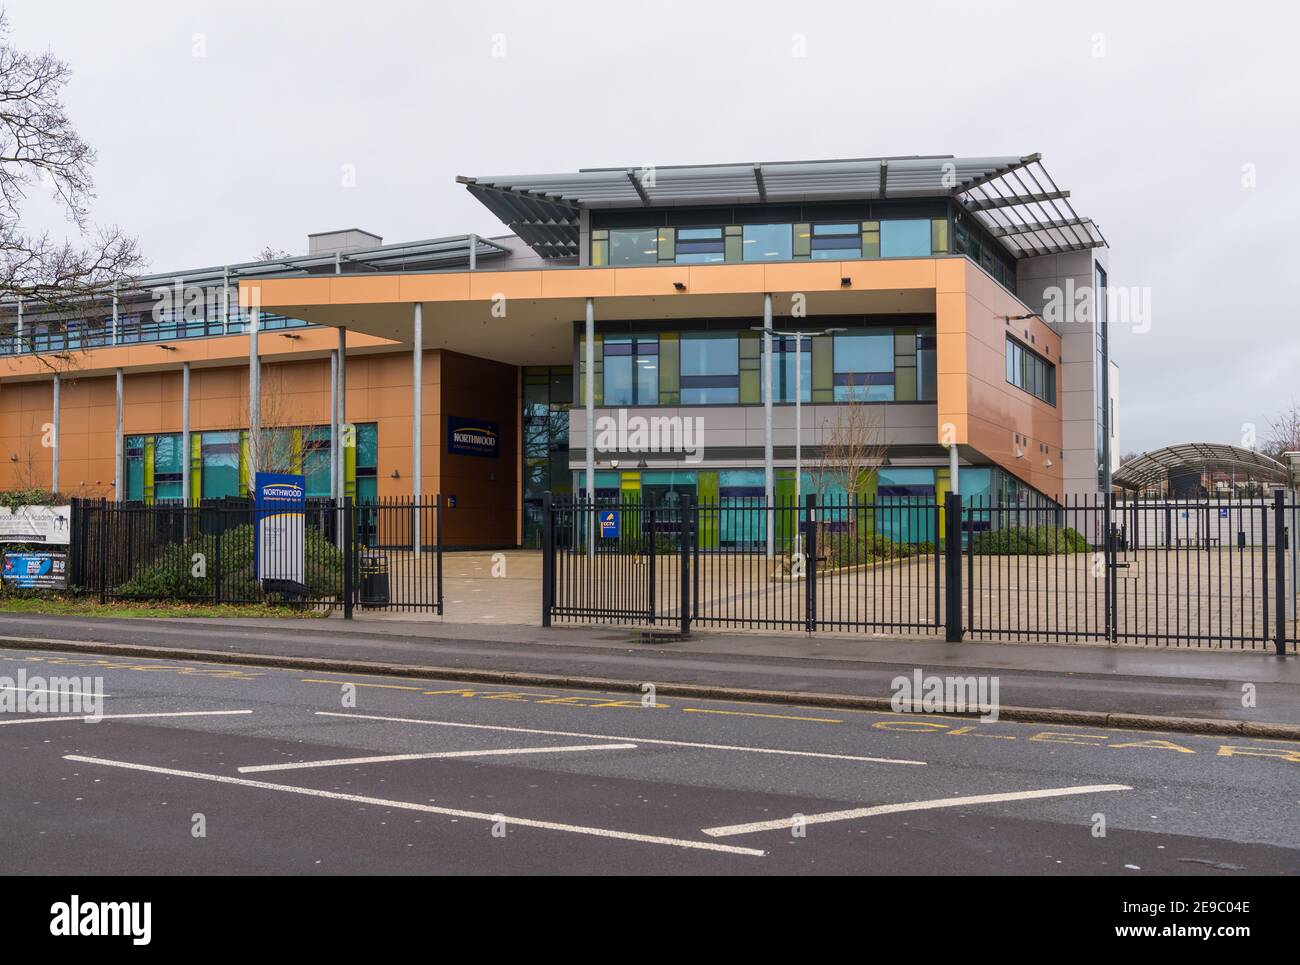 Northwood School, a coeducational secondary school and sixth form situated in Northwood, London Borough of Hillingdon, England, UK Stock Photo